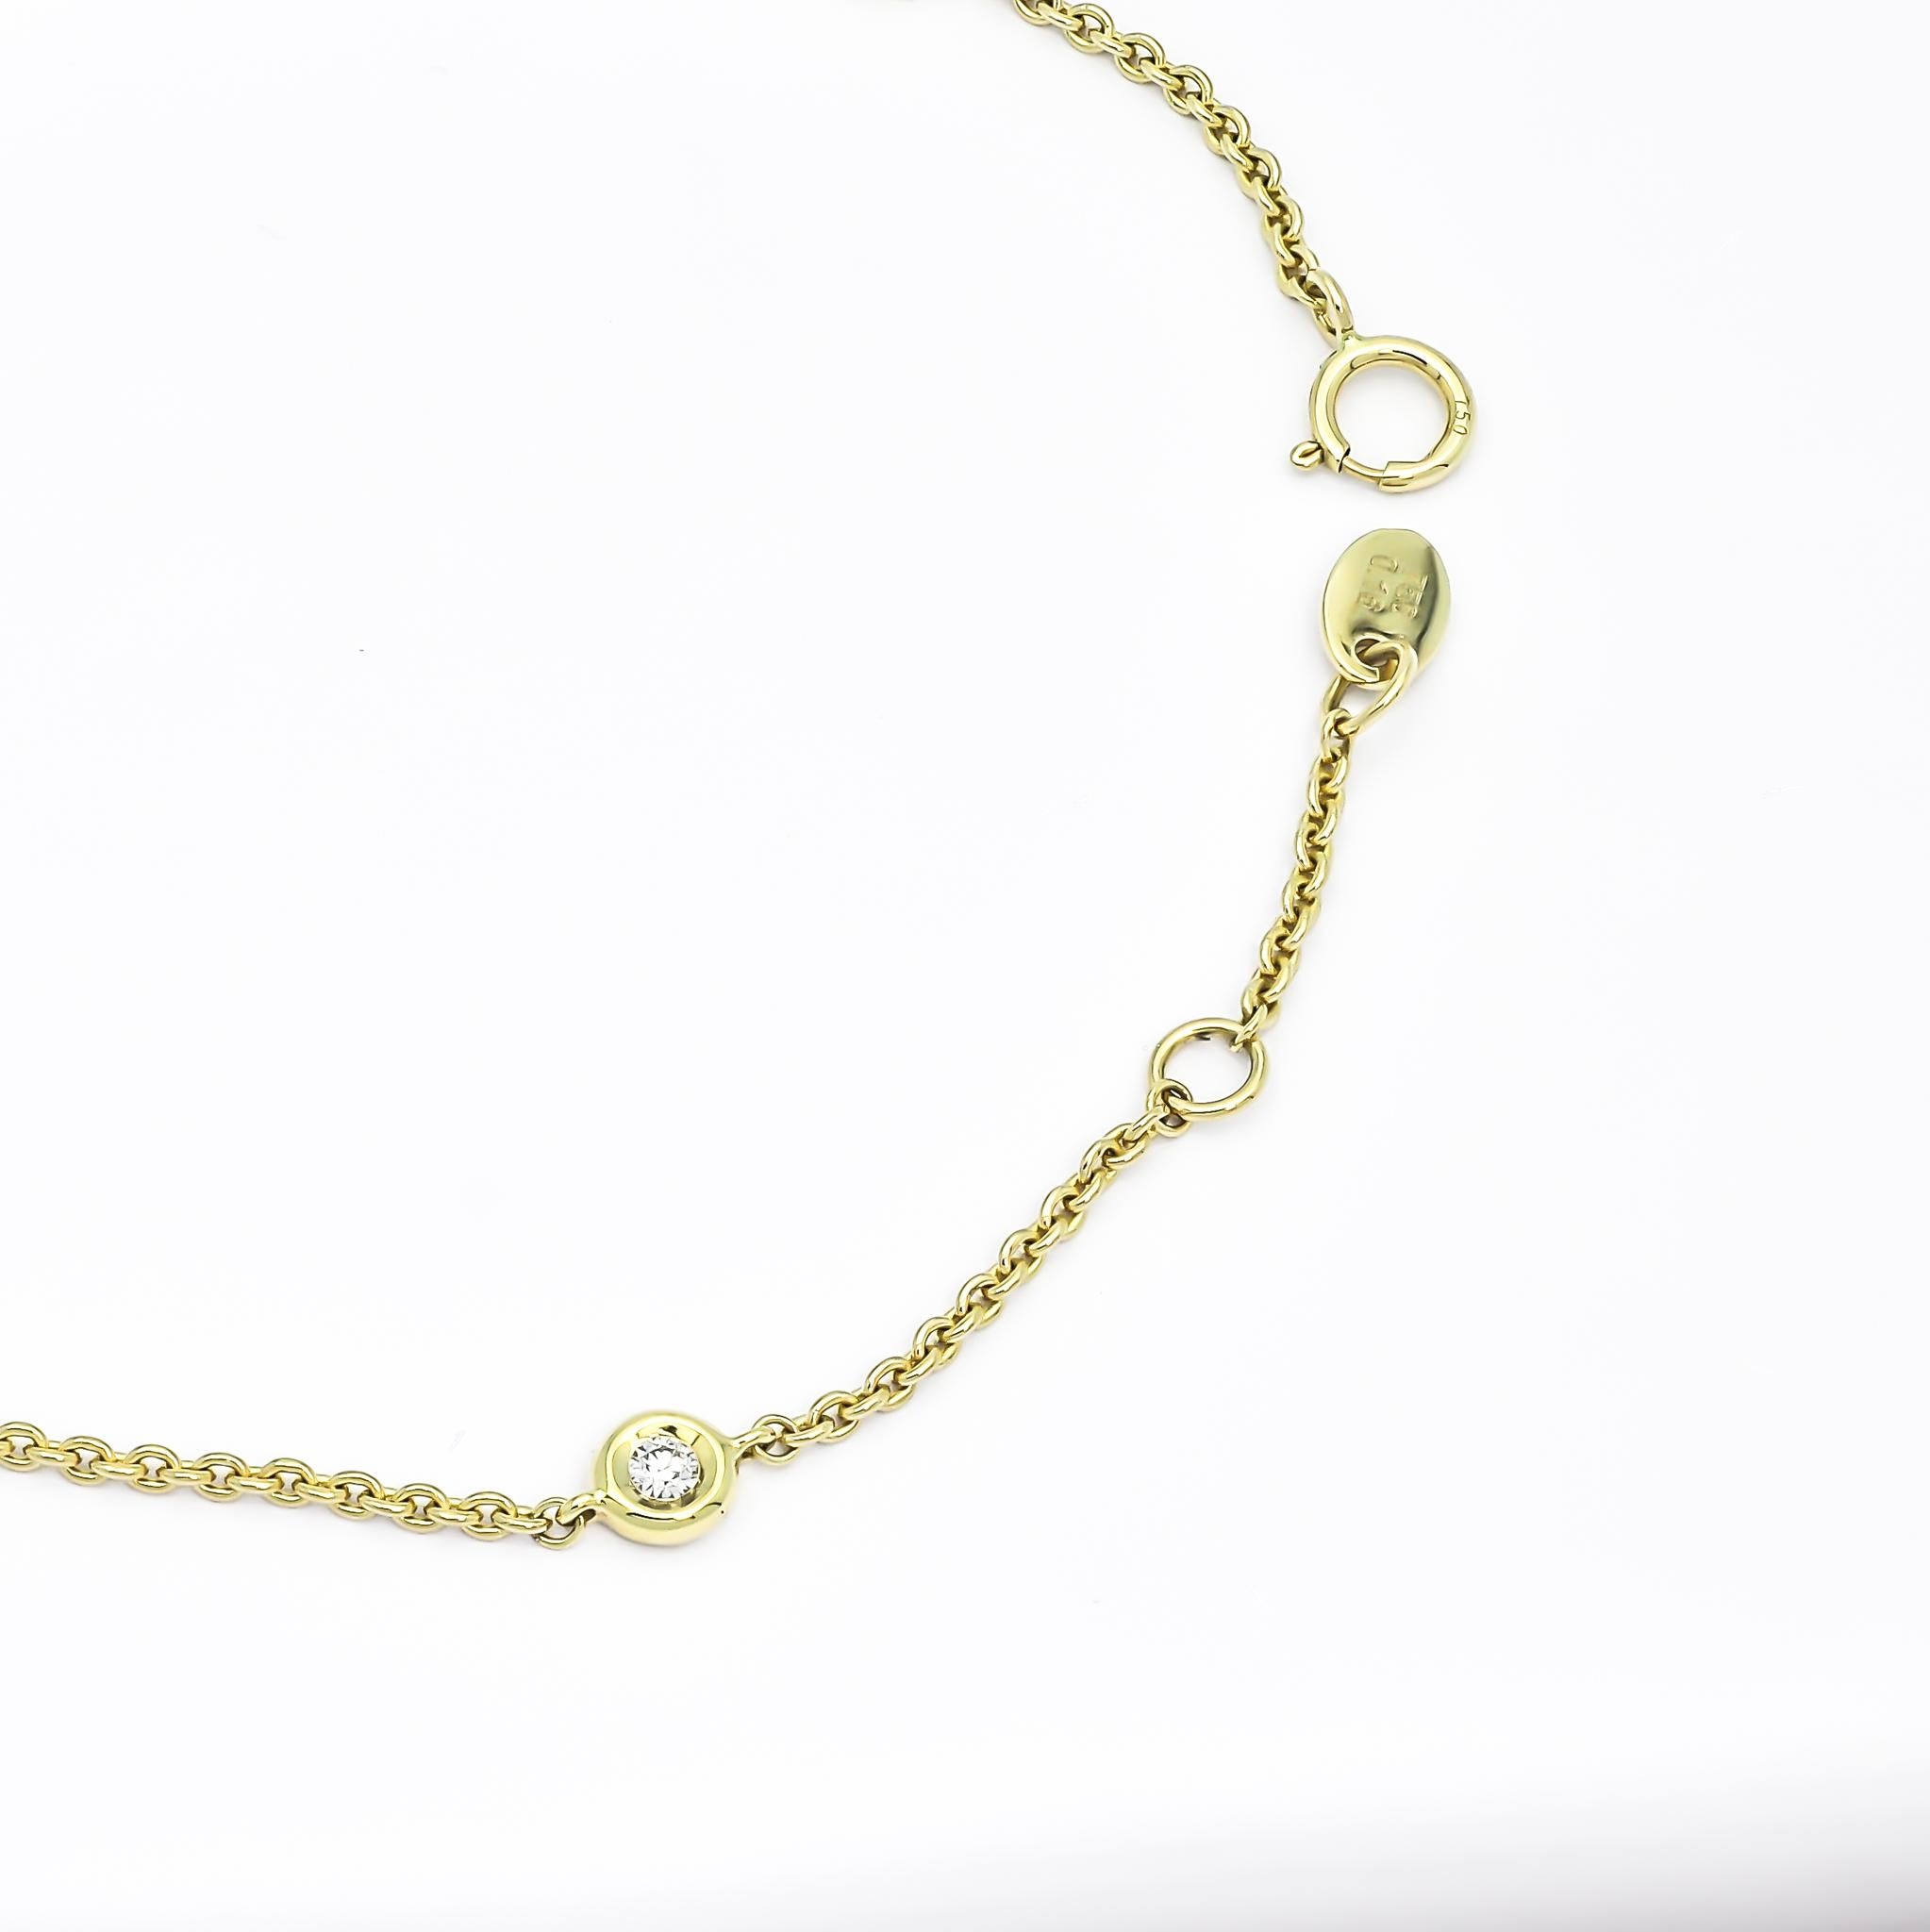 Immerse yourself in the delicate beauty of this exquisite bracelet, artfully crafted in 18k Yellow gold. The bracelet showcases a captivating display of soft shimmering chain links, gorgeously enhanced by round-shape diamonds meticulously set in